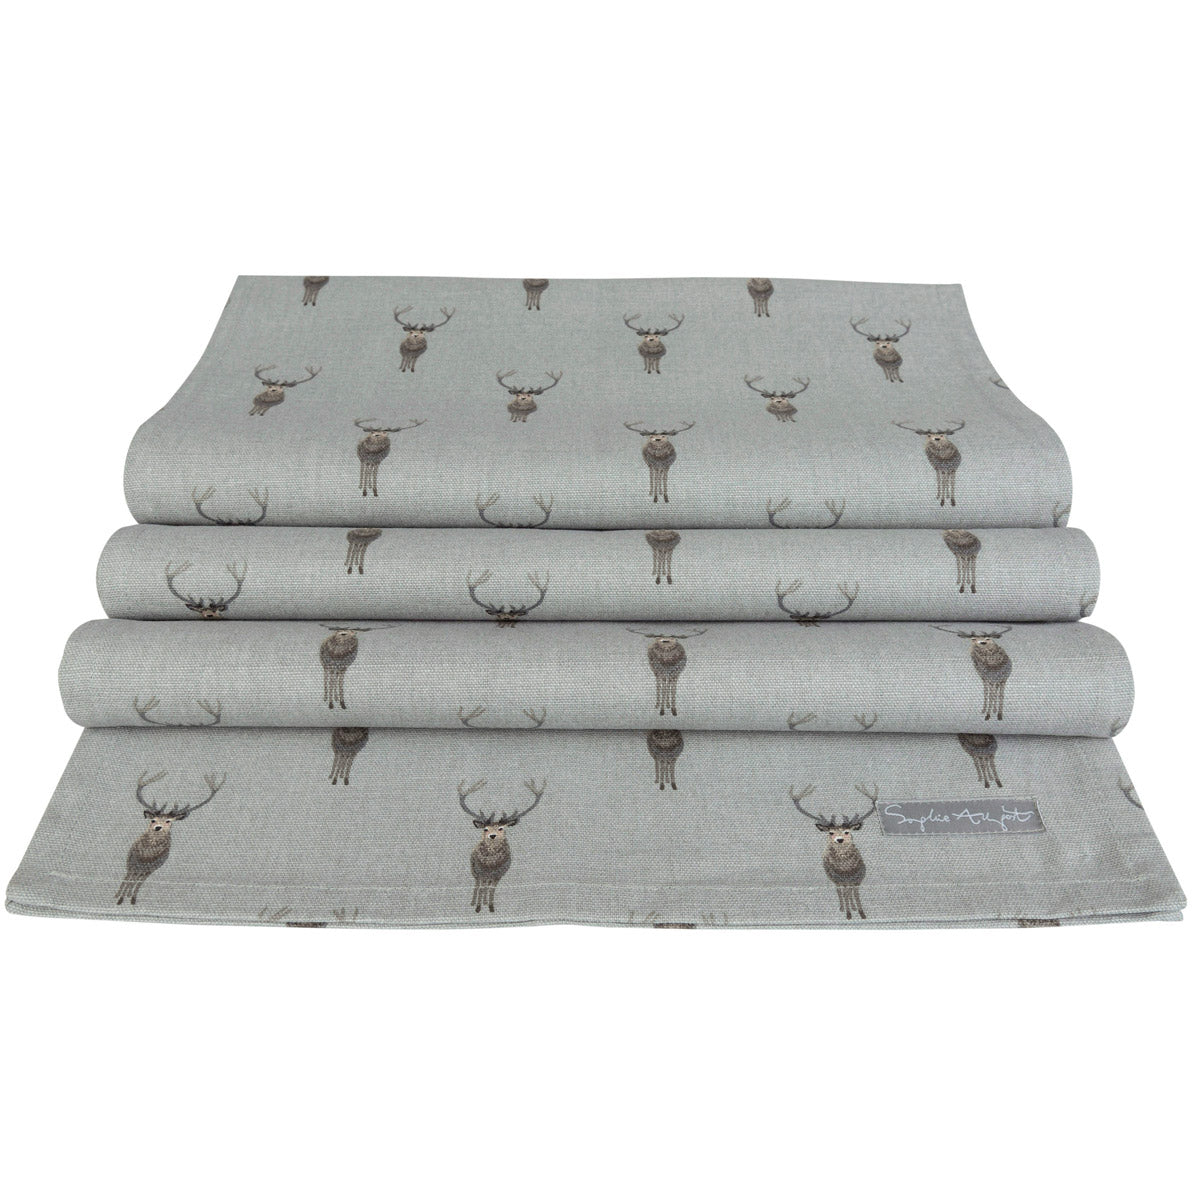 Highland Stag Table Runner